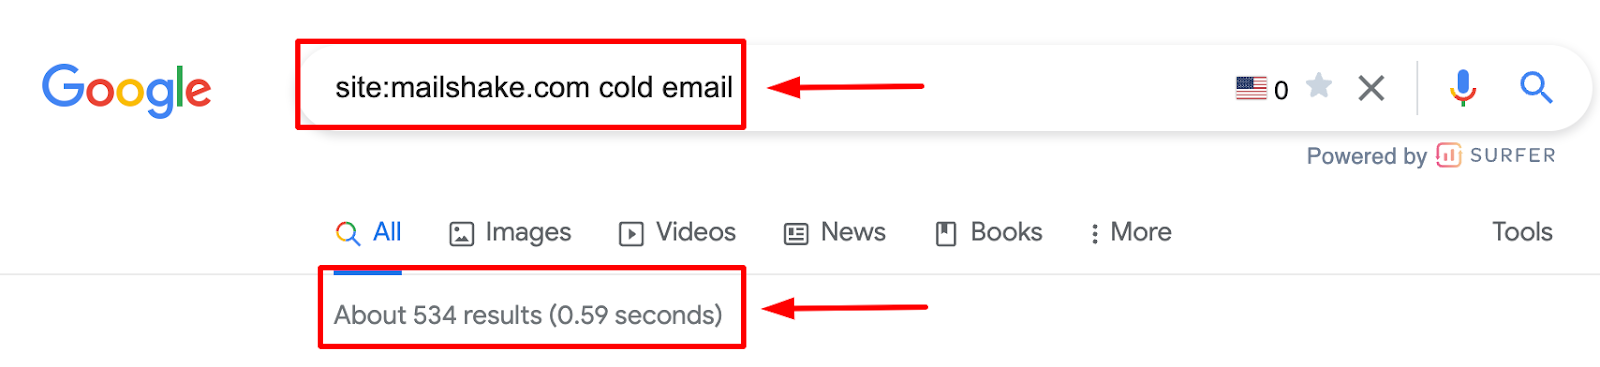 Mailshake.com indexed pages relevant to cold email